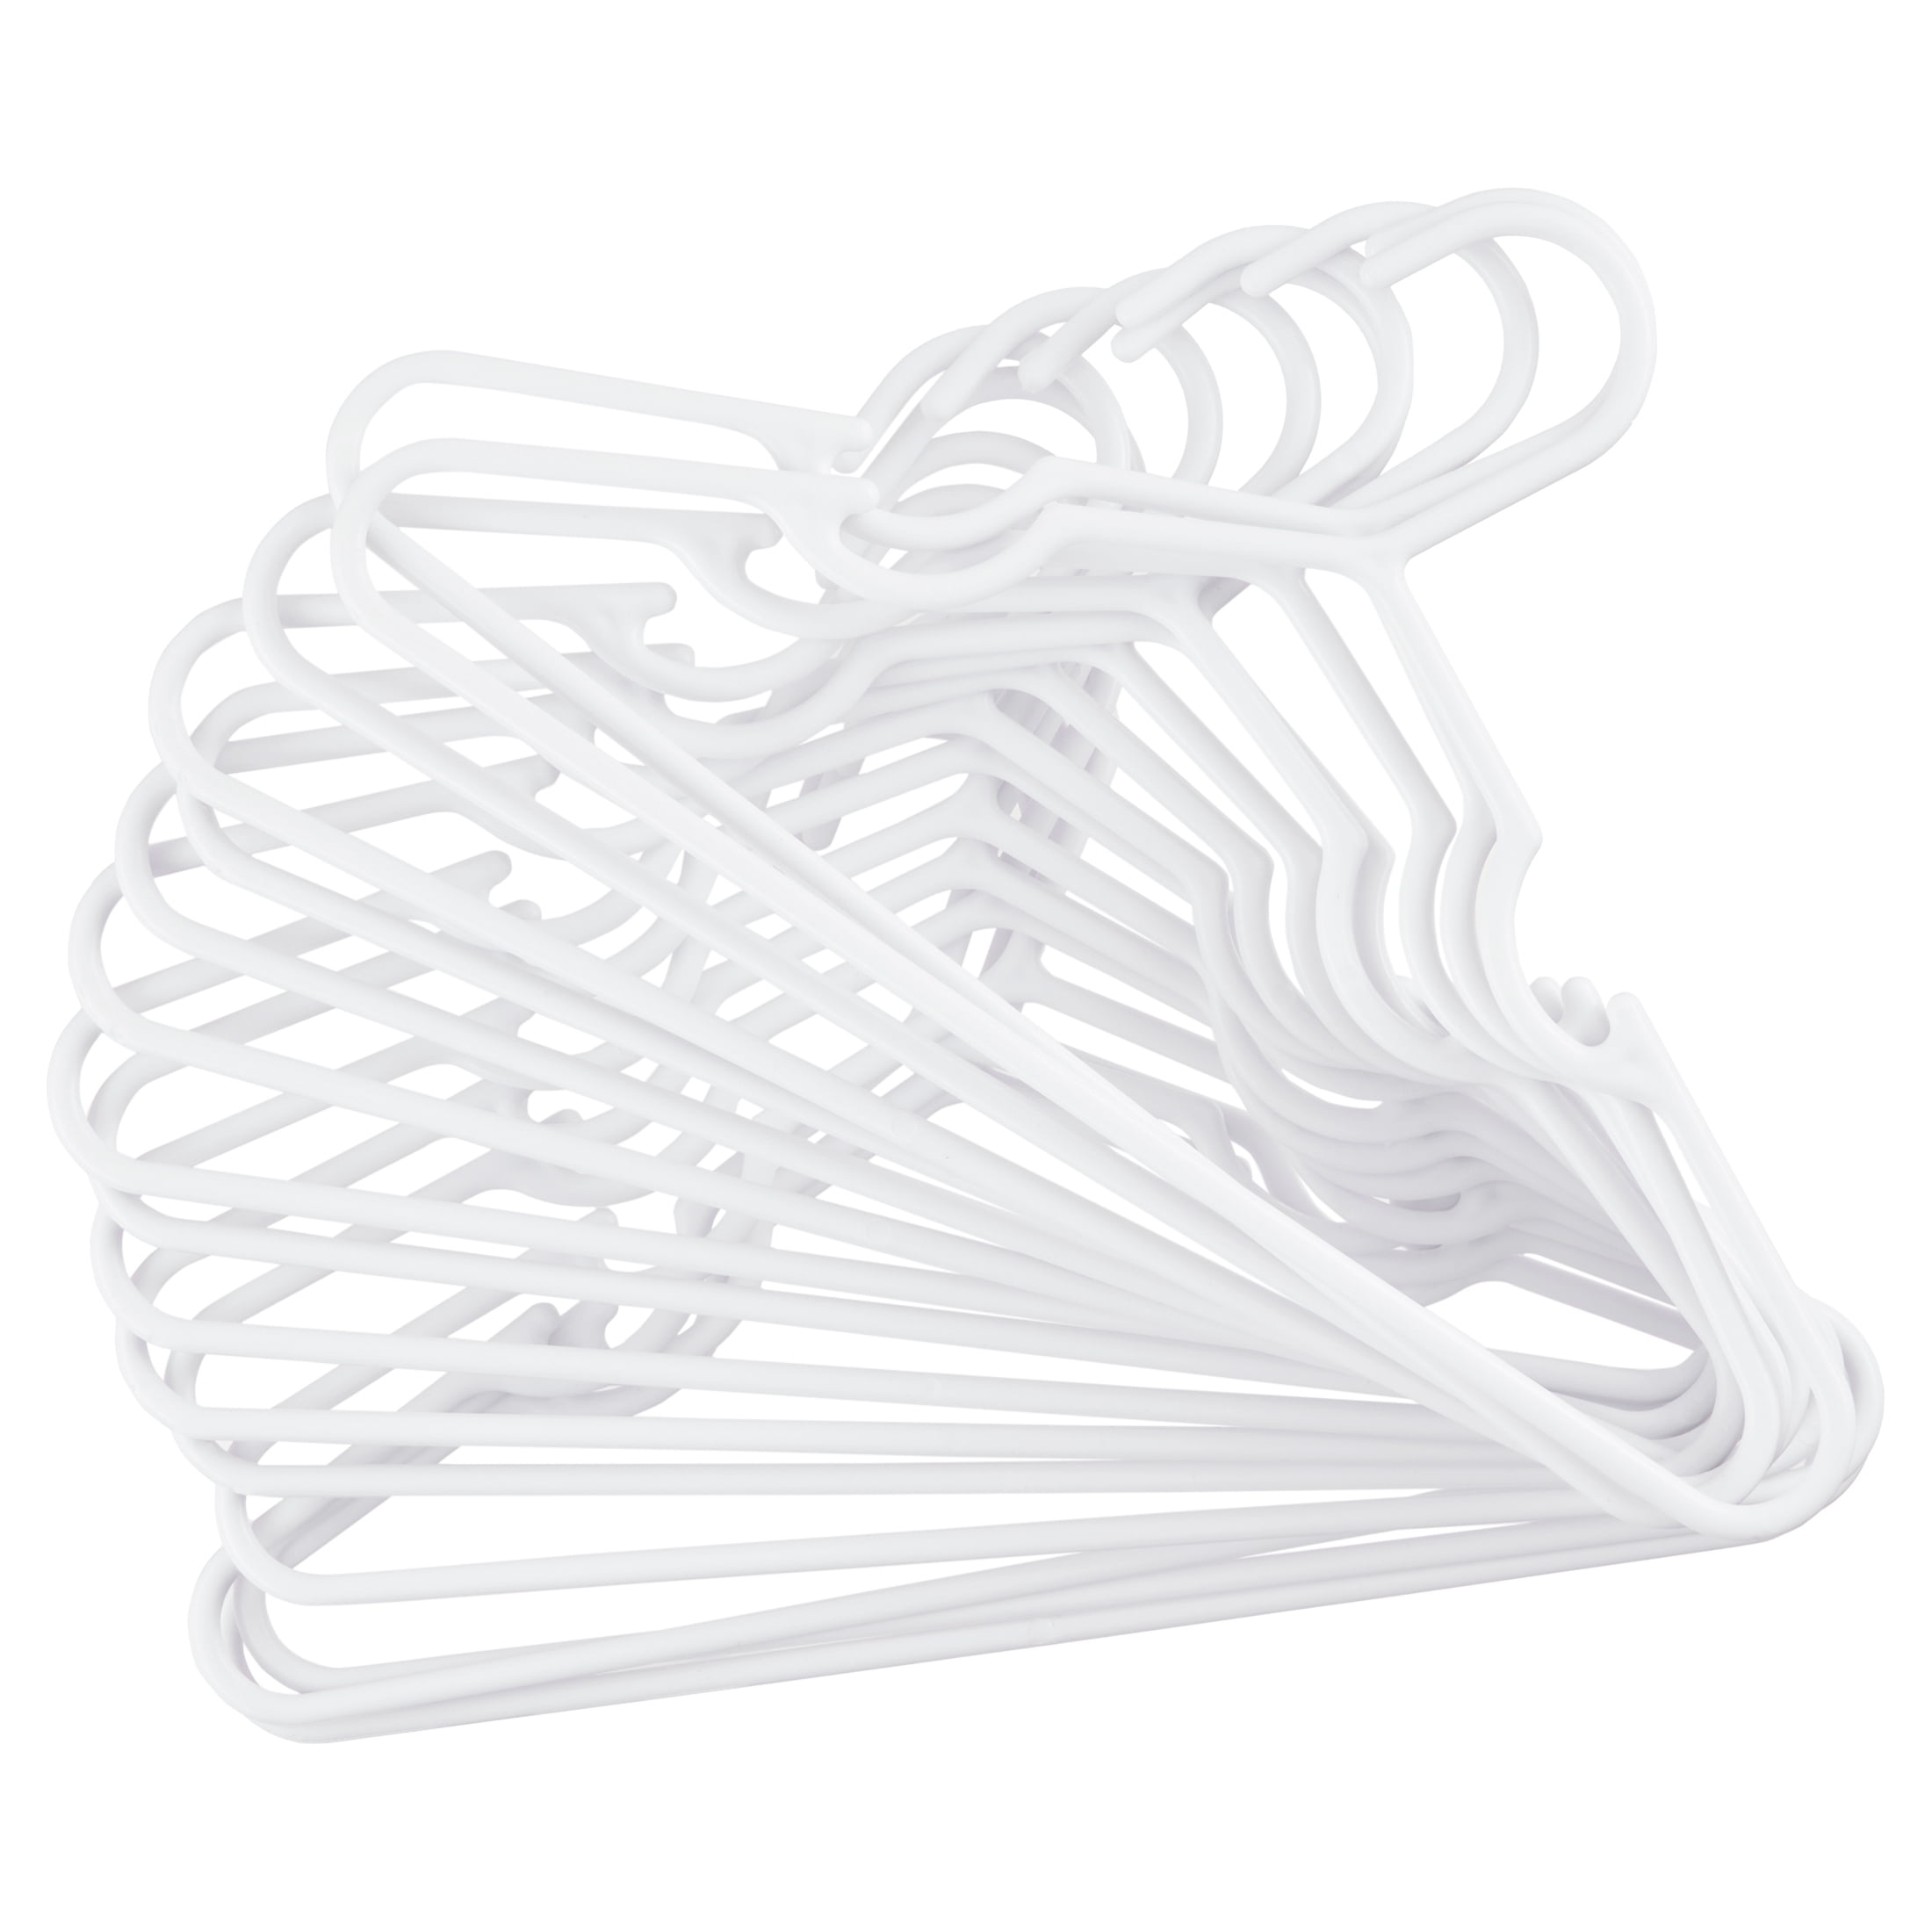 Neaties 60pk Made in USA Baby Hangers  Kids Hangers for Children's  Clothes, Toddler Outfits and